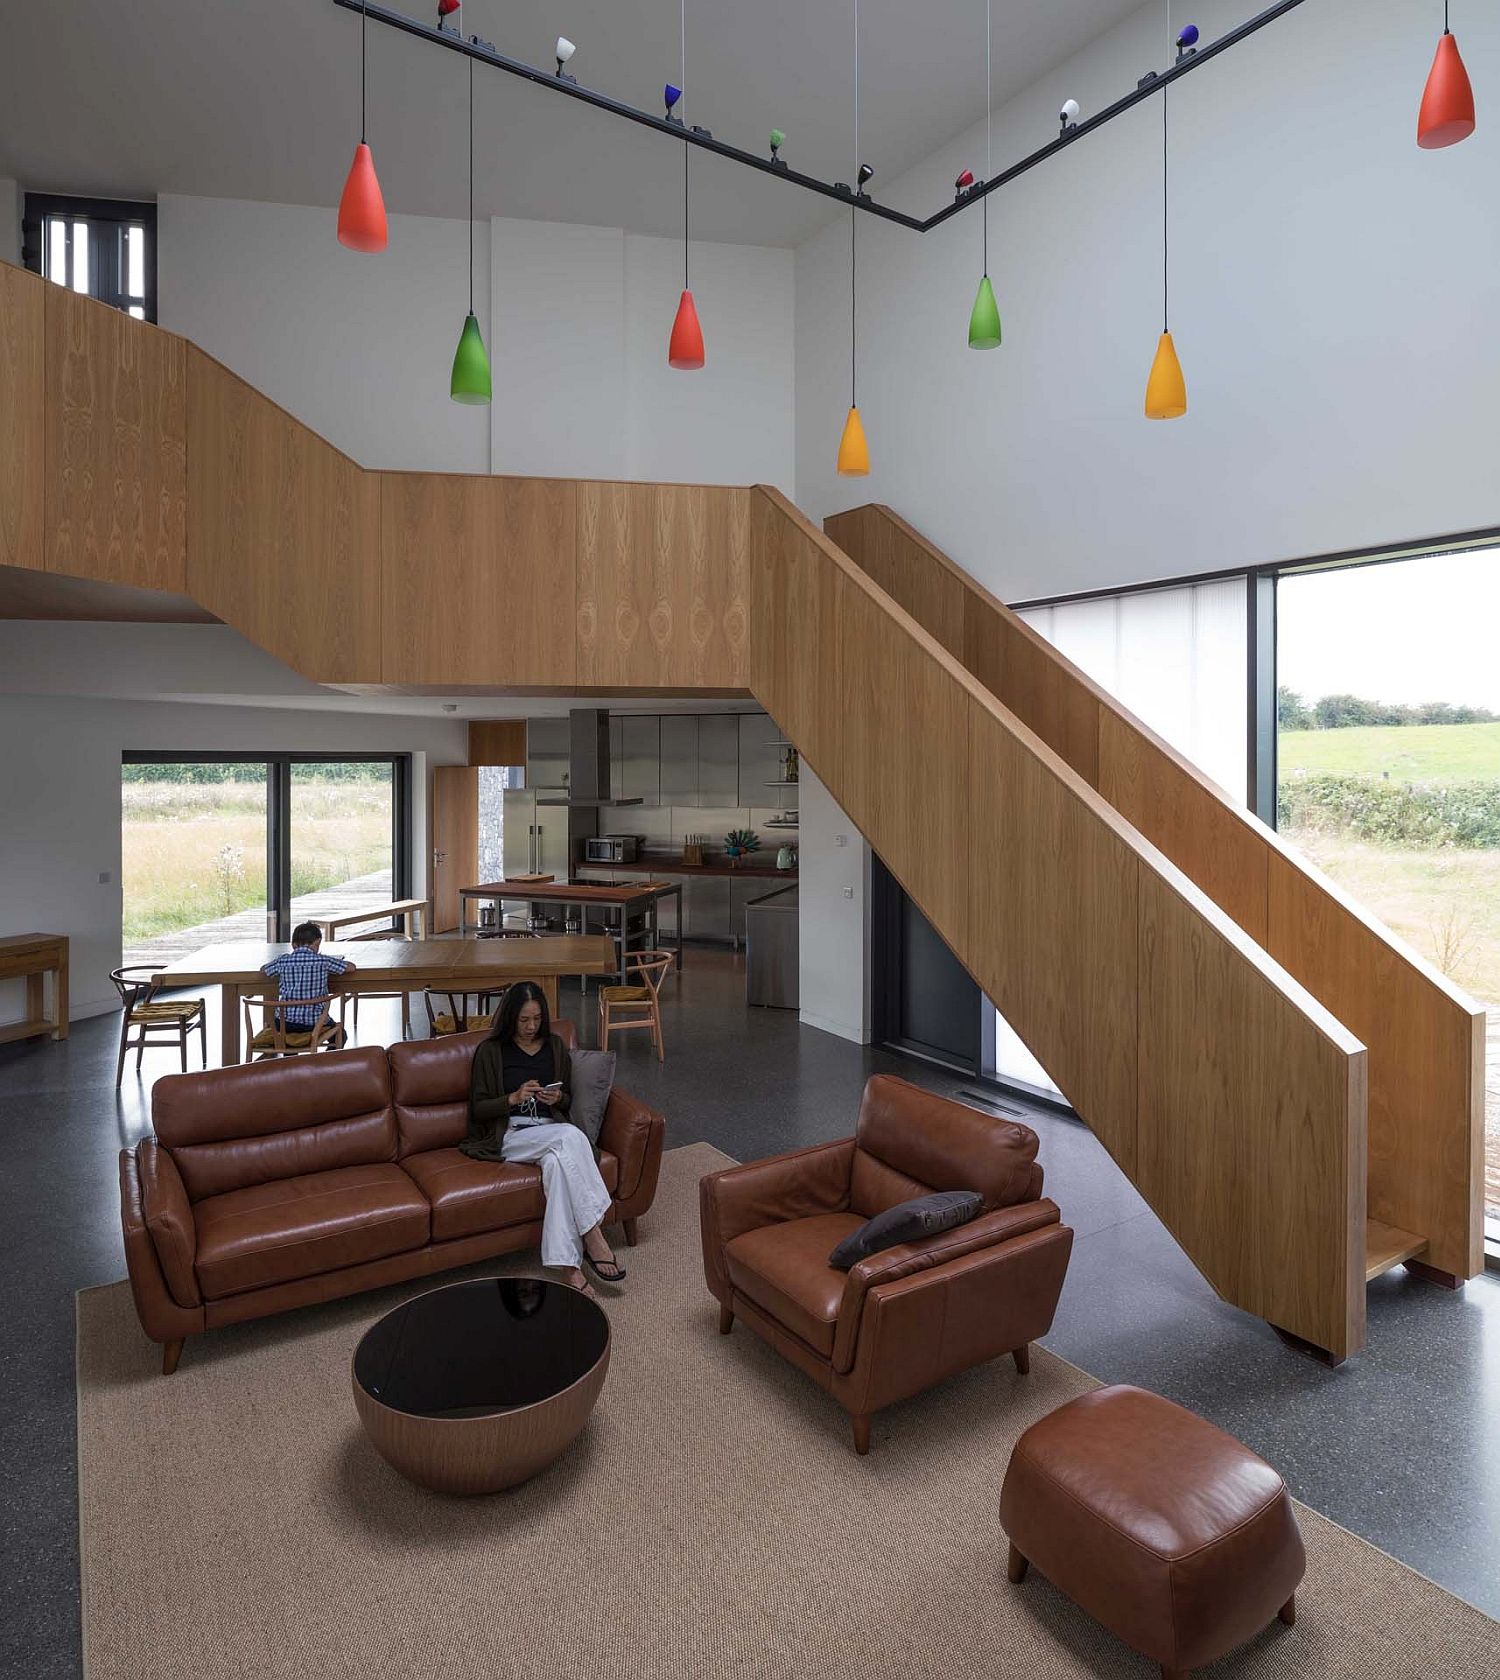 Living-room-of-the-house-illuminated-using-colorful-pendants